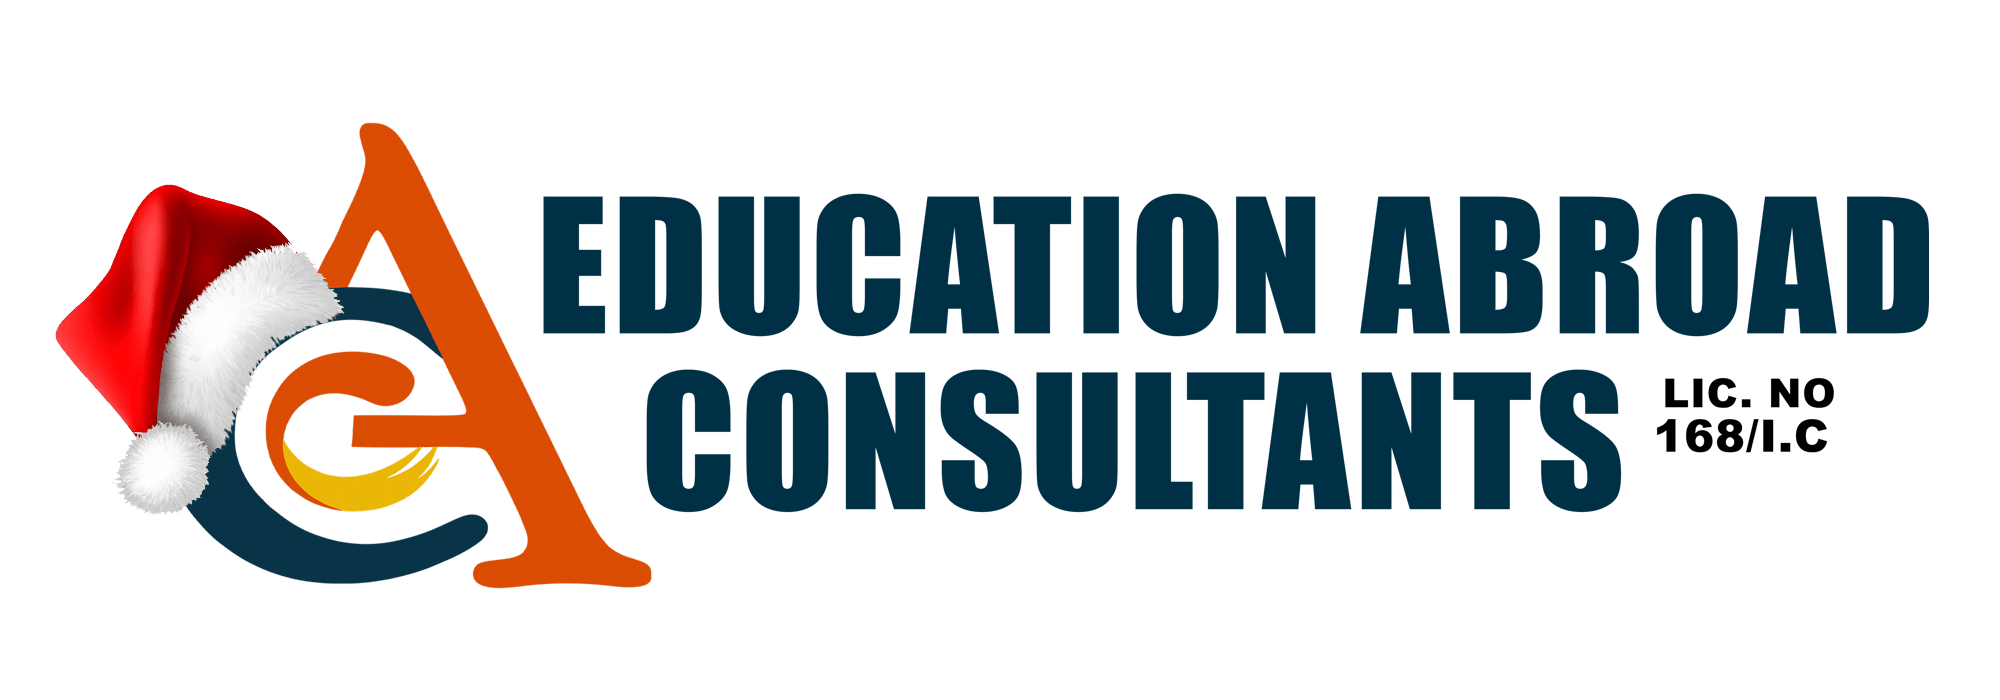 Education Abroad Consultants